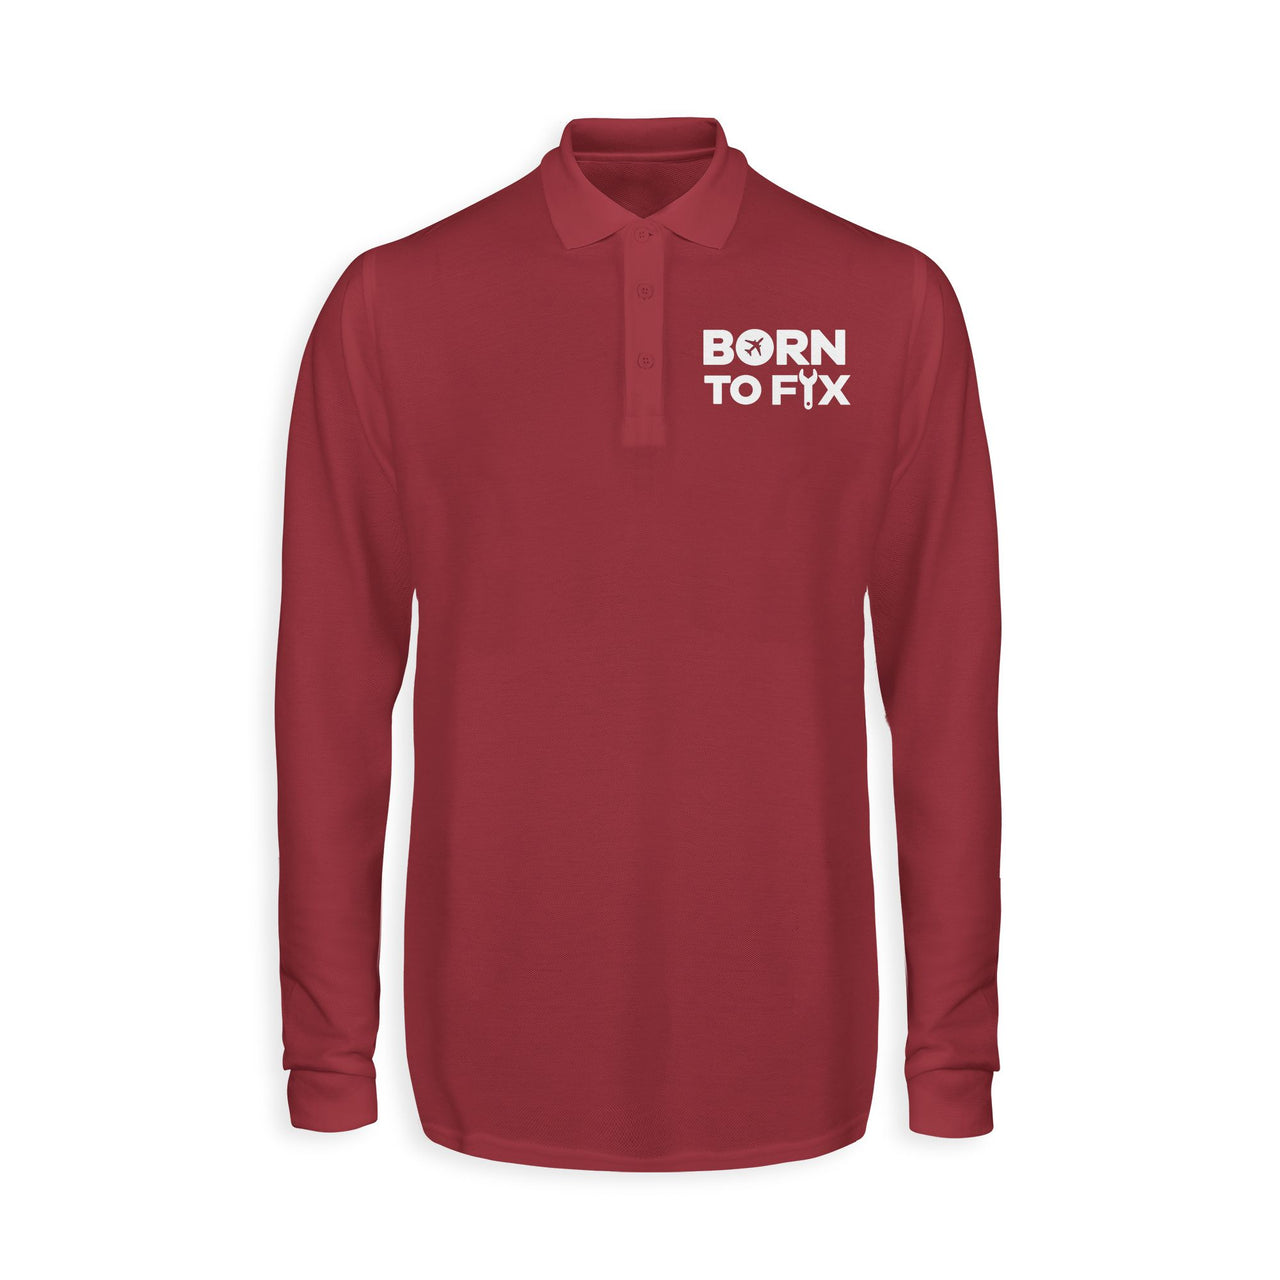 Born To Fix Airplanes Designed Long Sleeve Polo T-Shirts